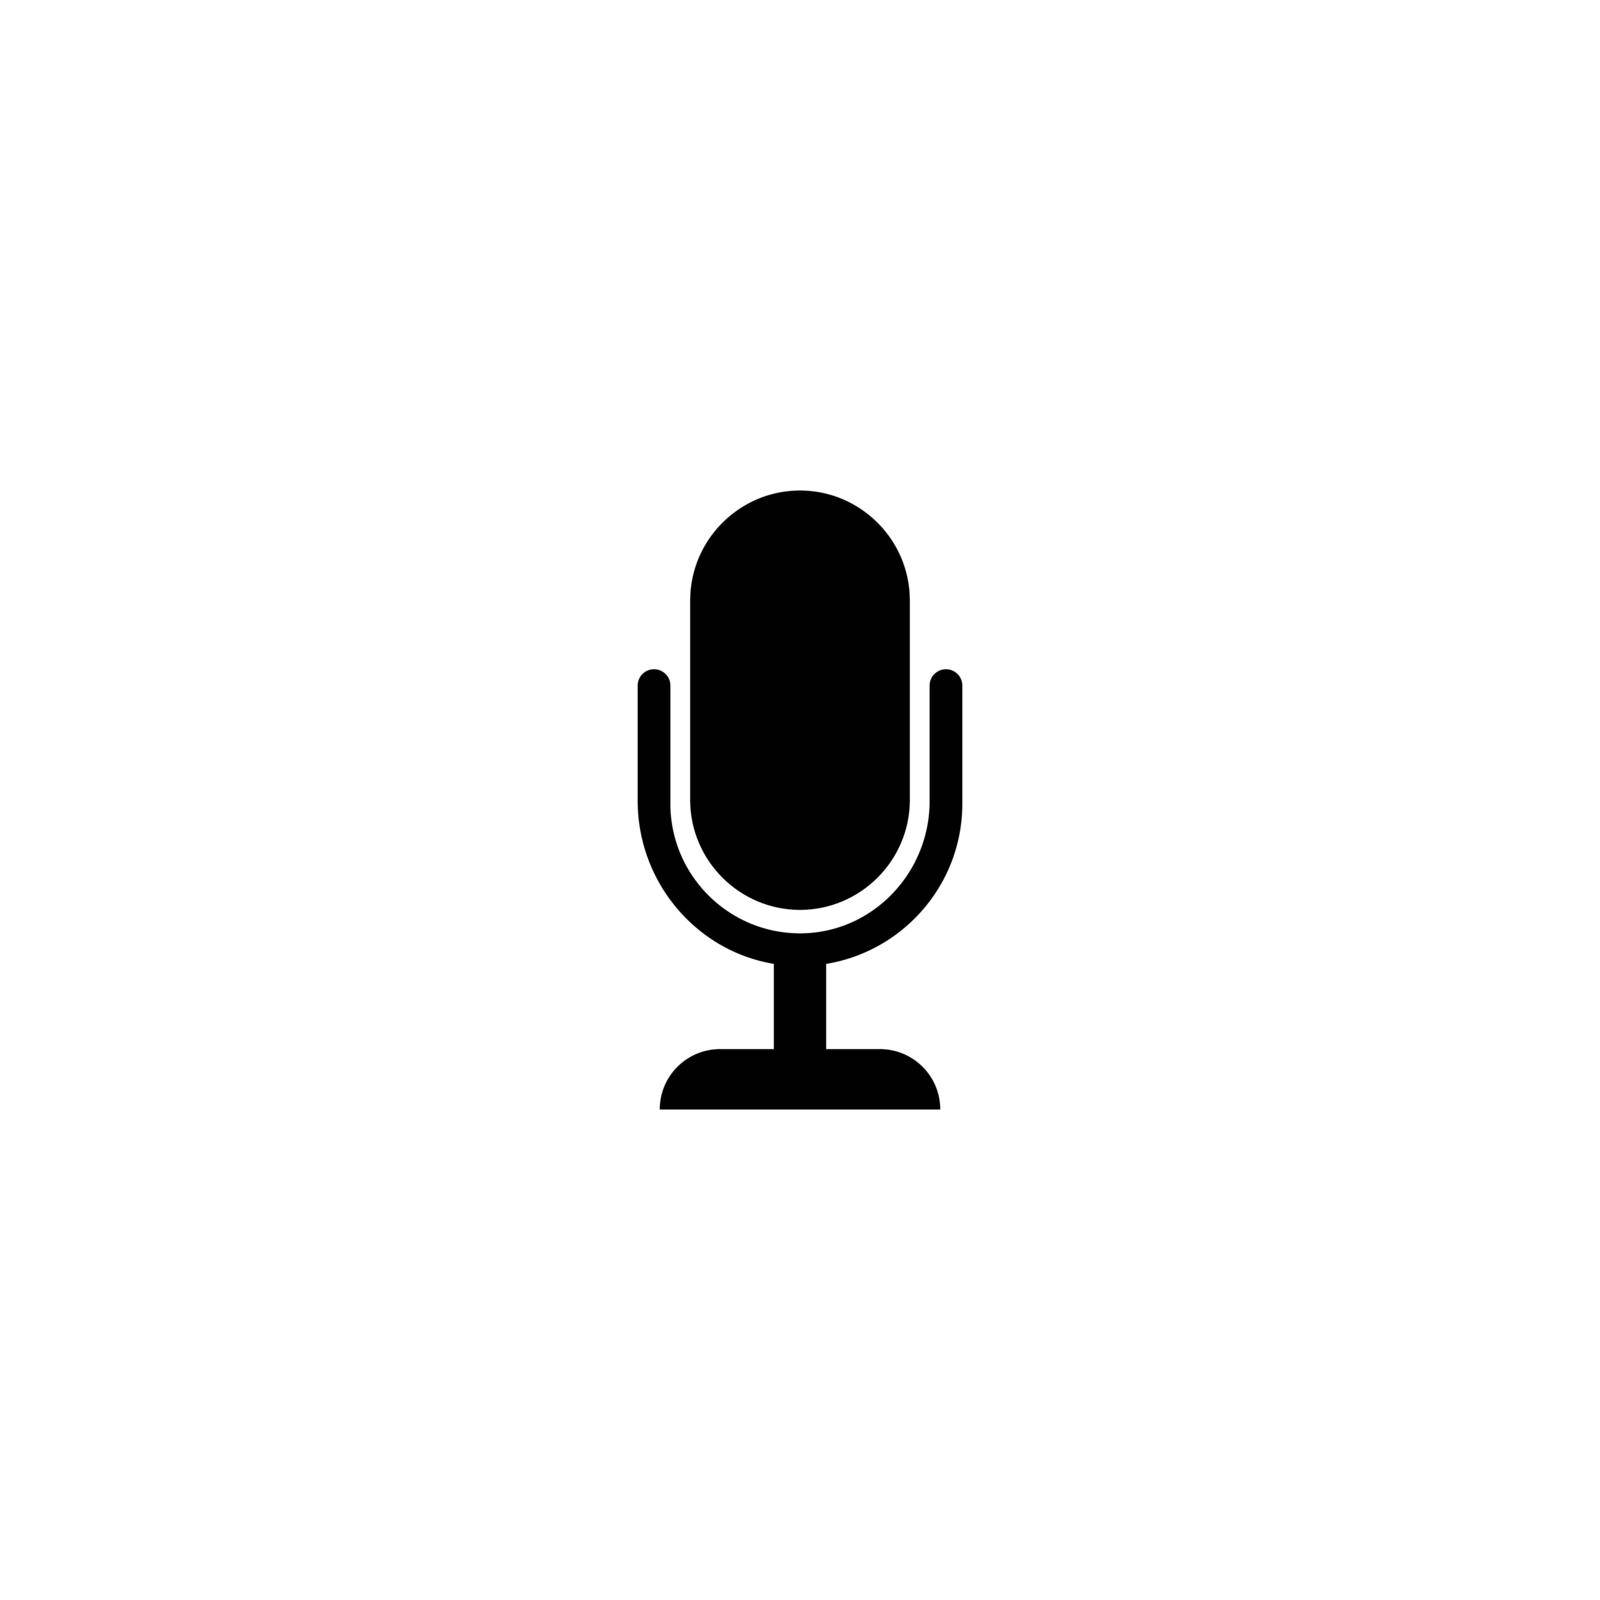 Microphone. Flat Vector Icon. Simple black symbol on white background